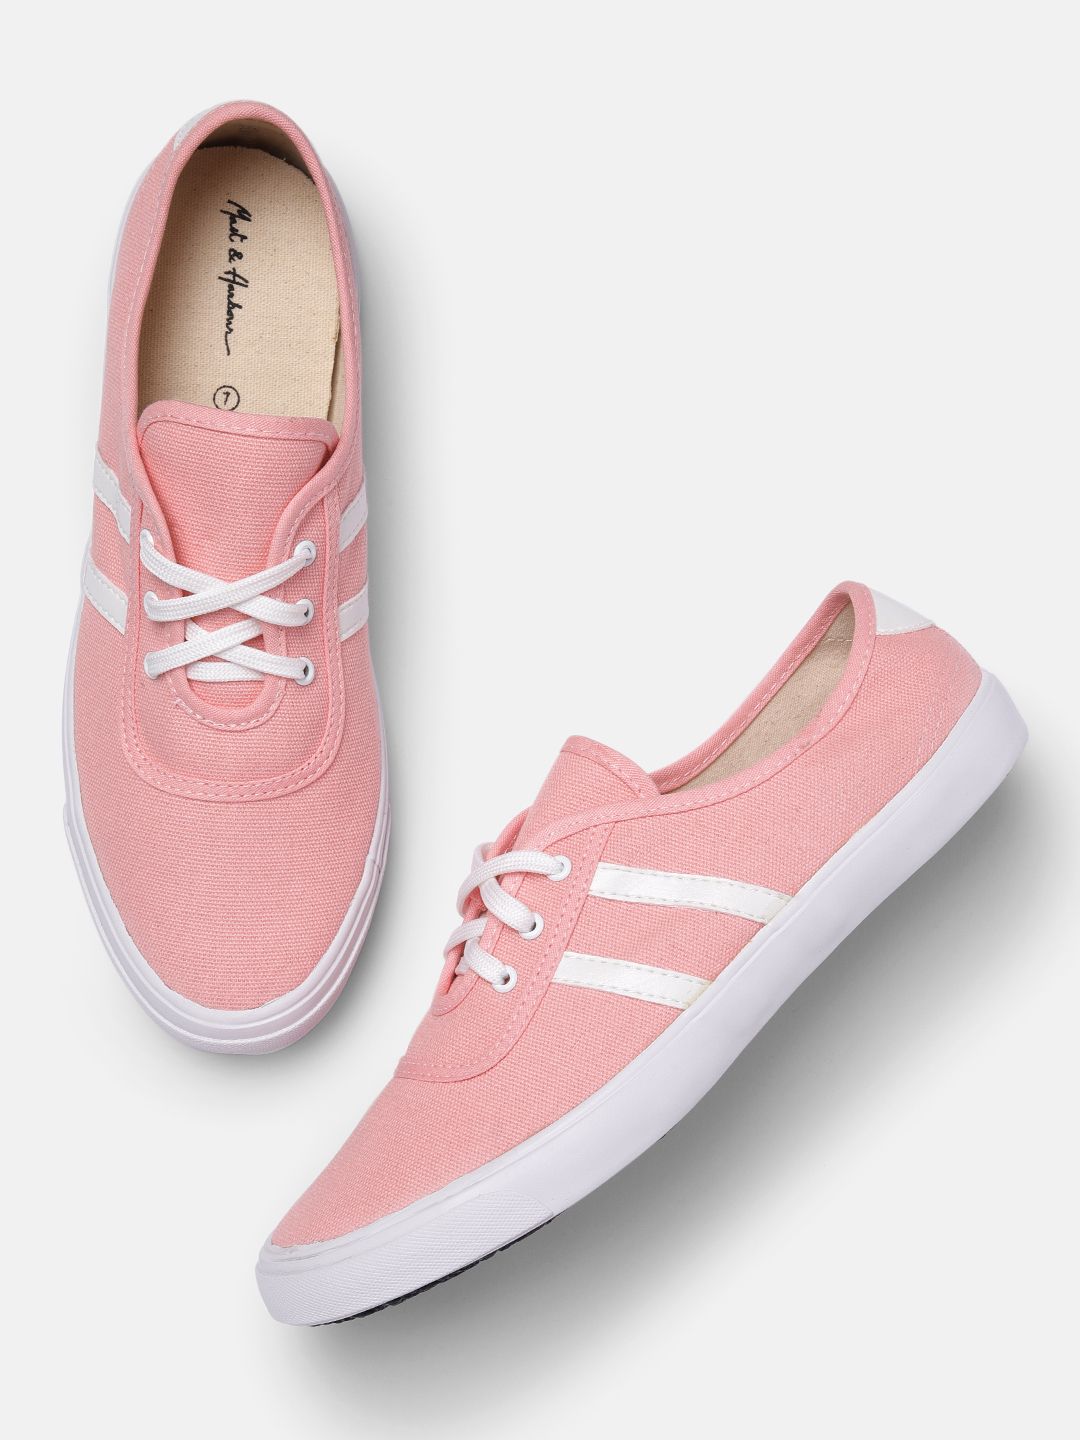 Mast & Harbour Women Pink Striped Sneakers Price in India